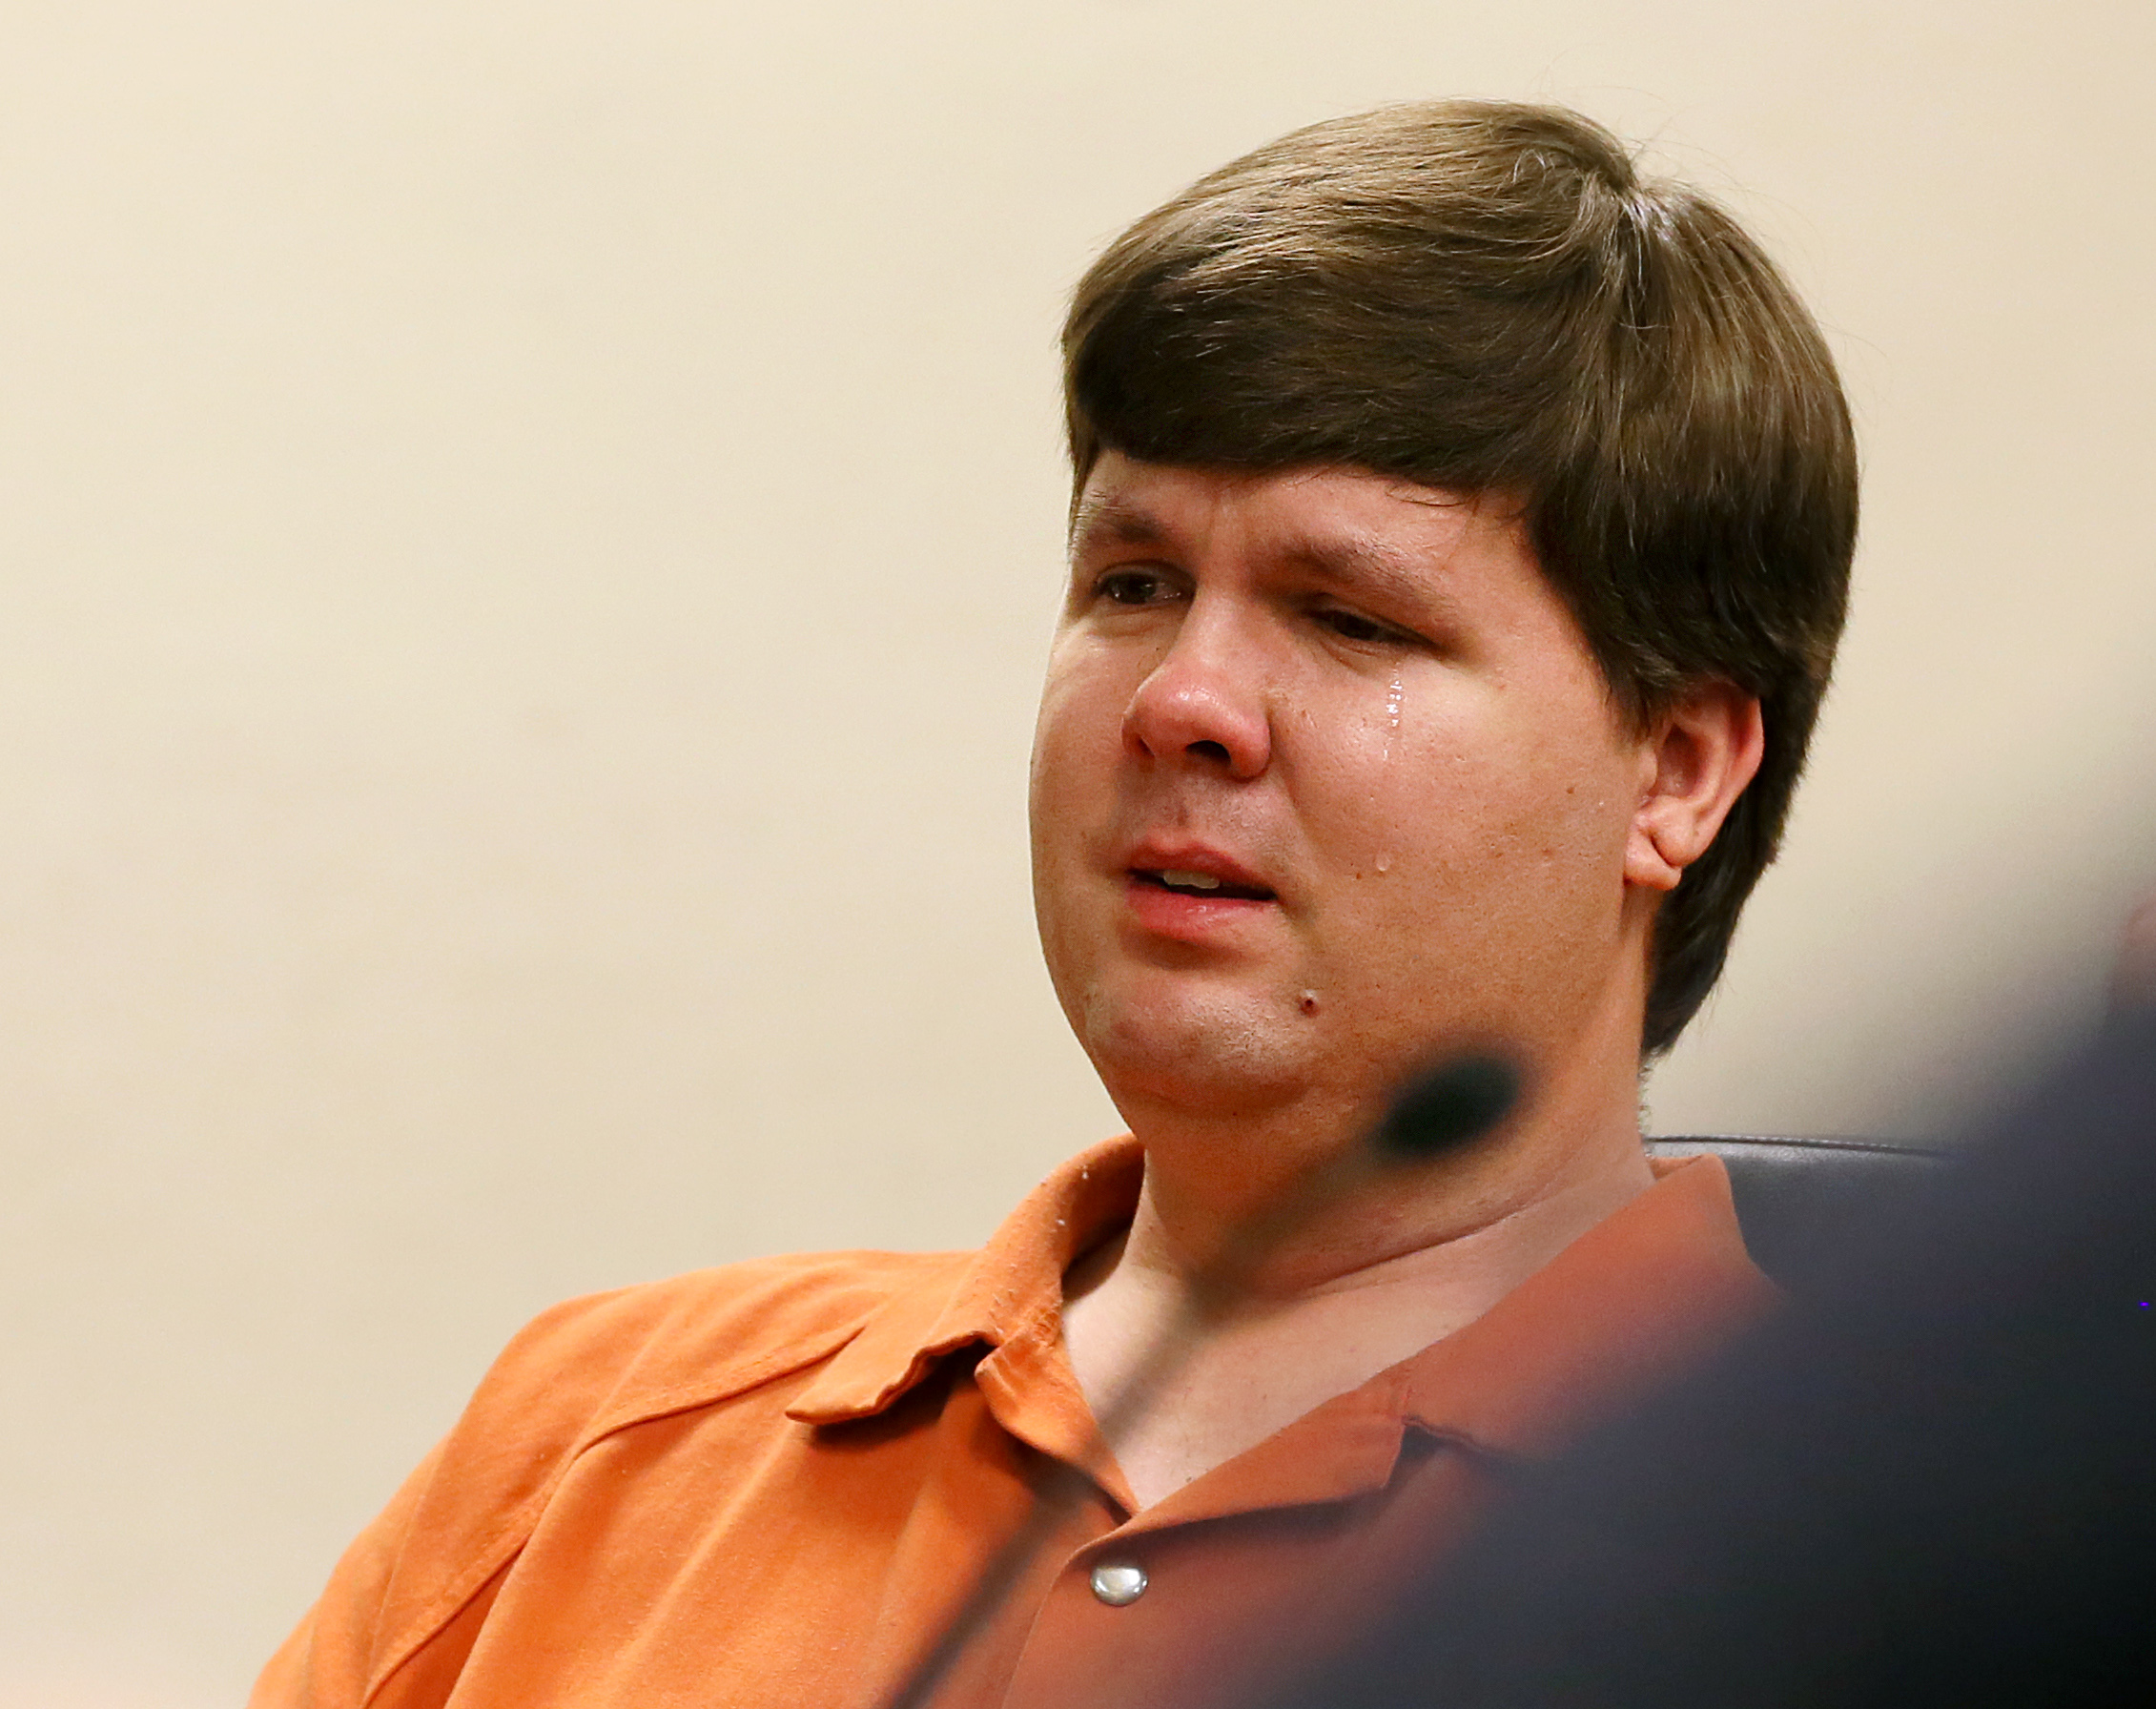 Justin Ross Harris, the father of a toddler who died after police say he was left in a hot car for about seven hours, sits during his bond hearing in Cobb County Magistrate Court, Thursday, July 3, 2014, in Marietta, Ga. (Kelly J. Huff—AP)